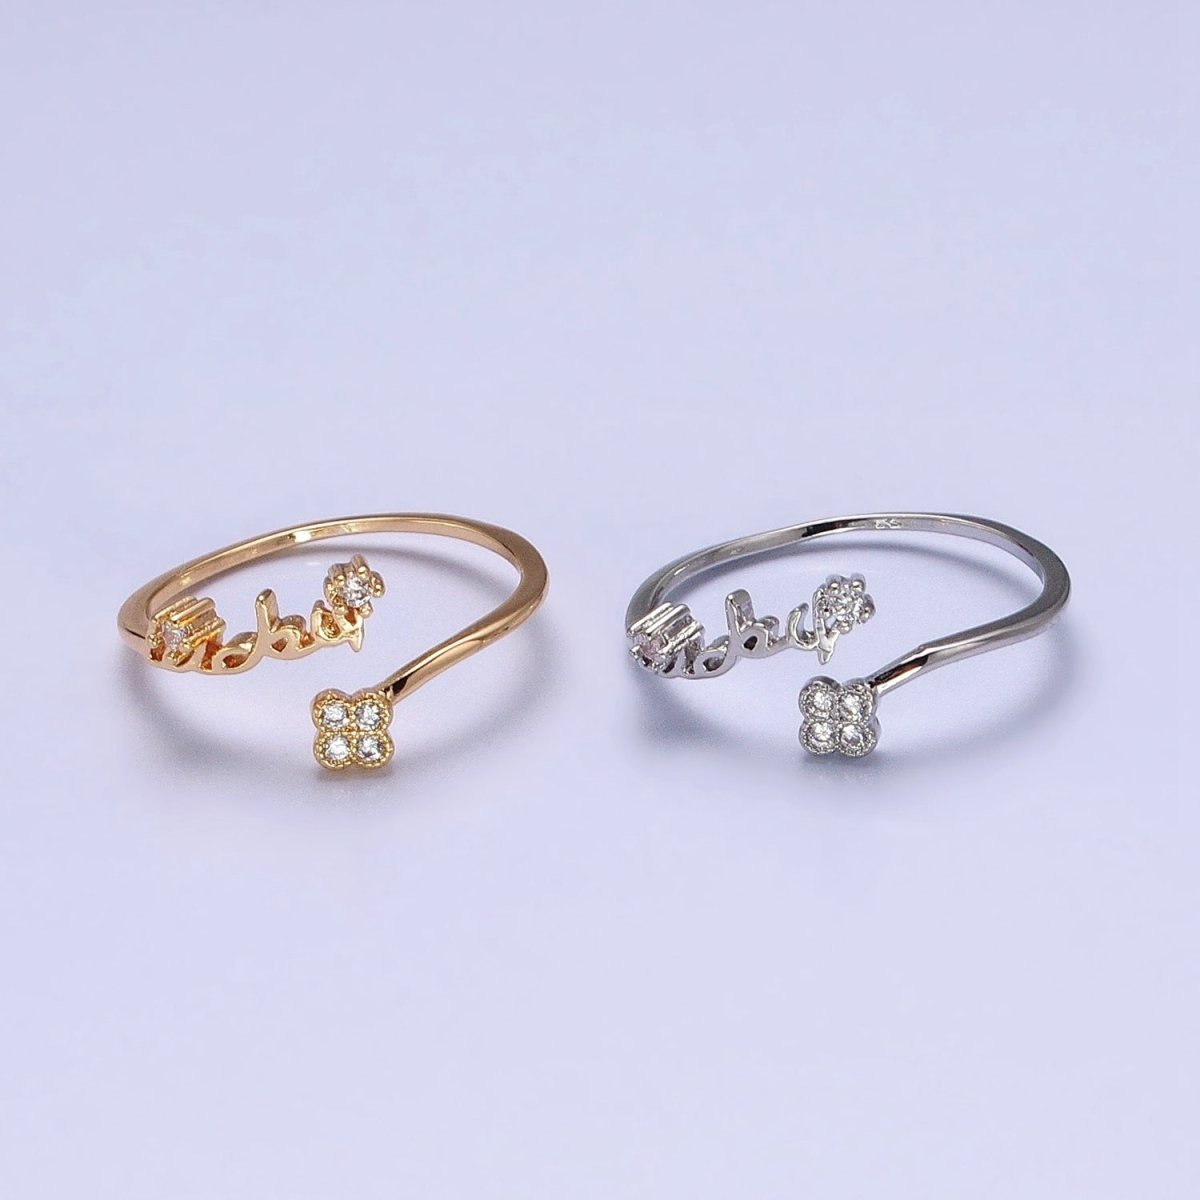 Thin Gold Plated Ring Wrap Flower CZ Stone Ring for Minimalist Jewelry O-1807 O-1808 - DLUXCA